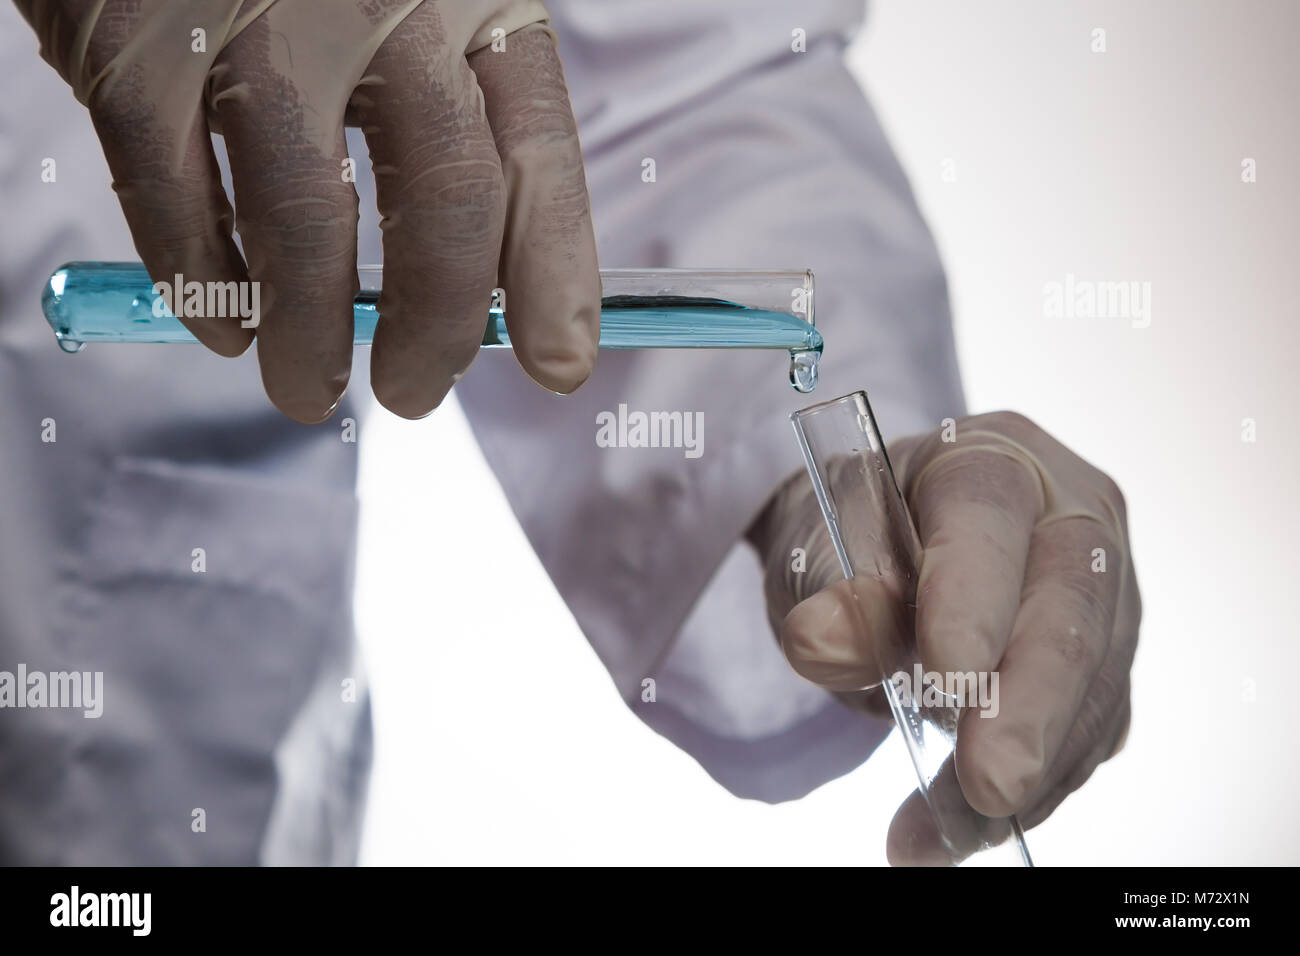 Scientists are experimenting in the lab. Stock Photo